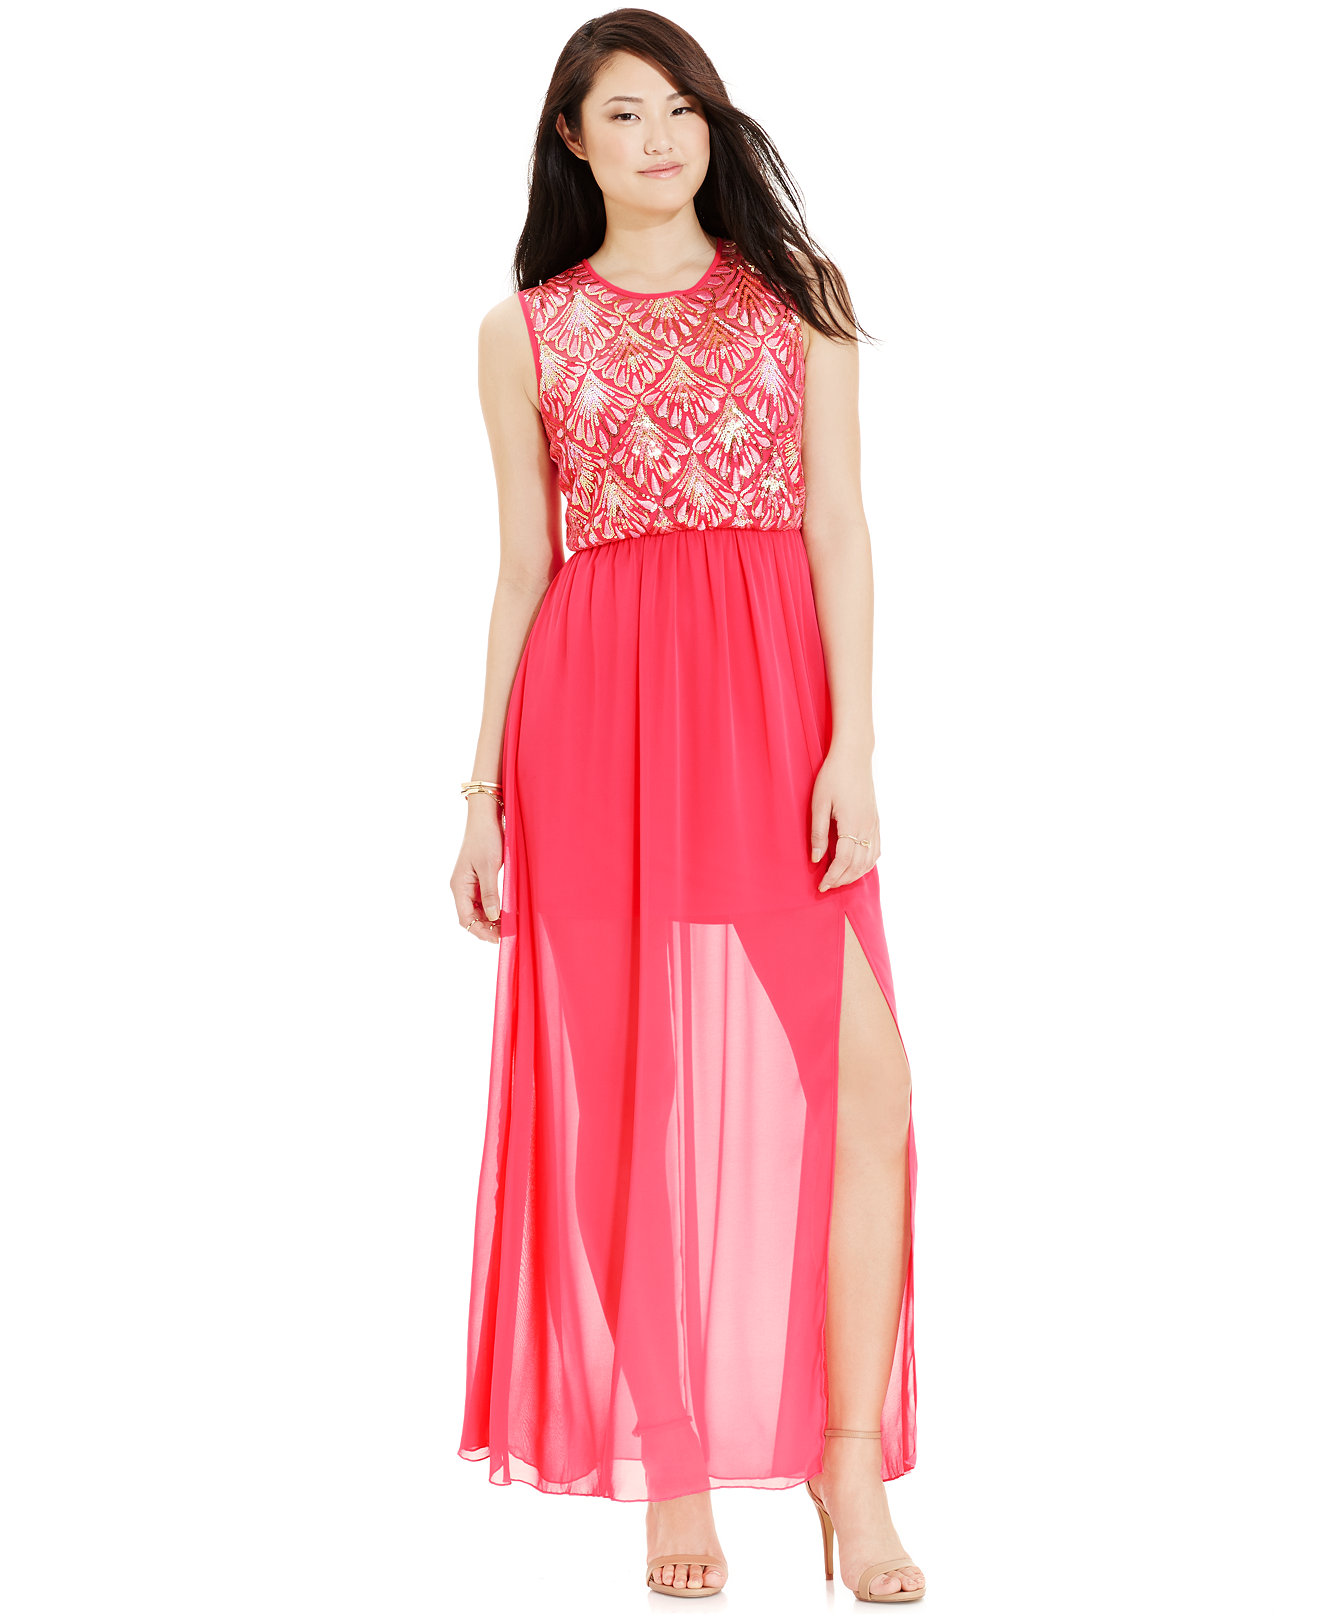 Maxi Dresses For Teenagers